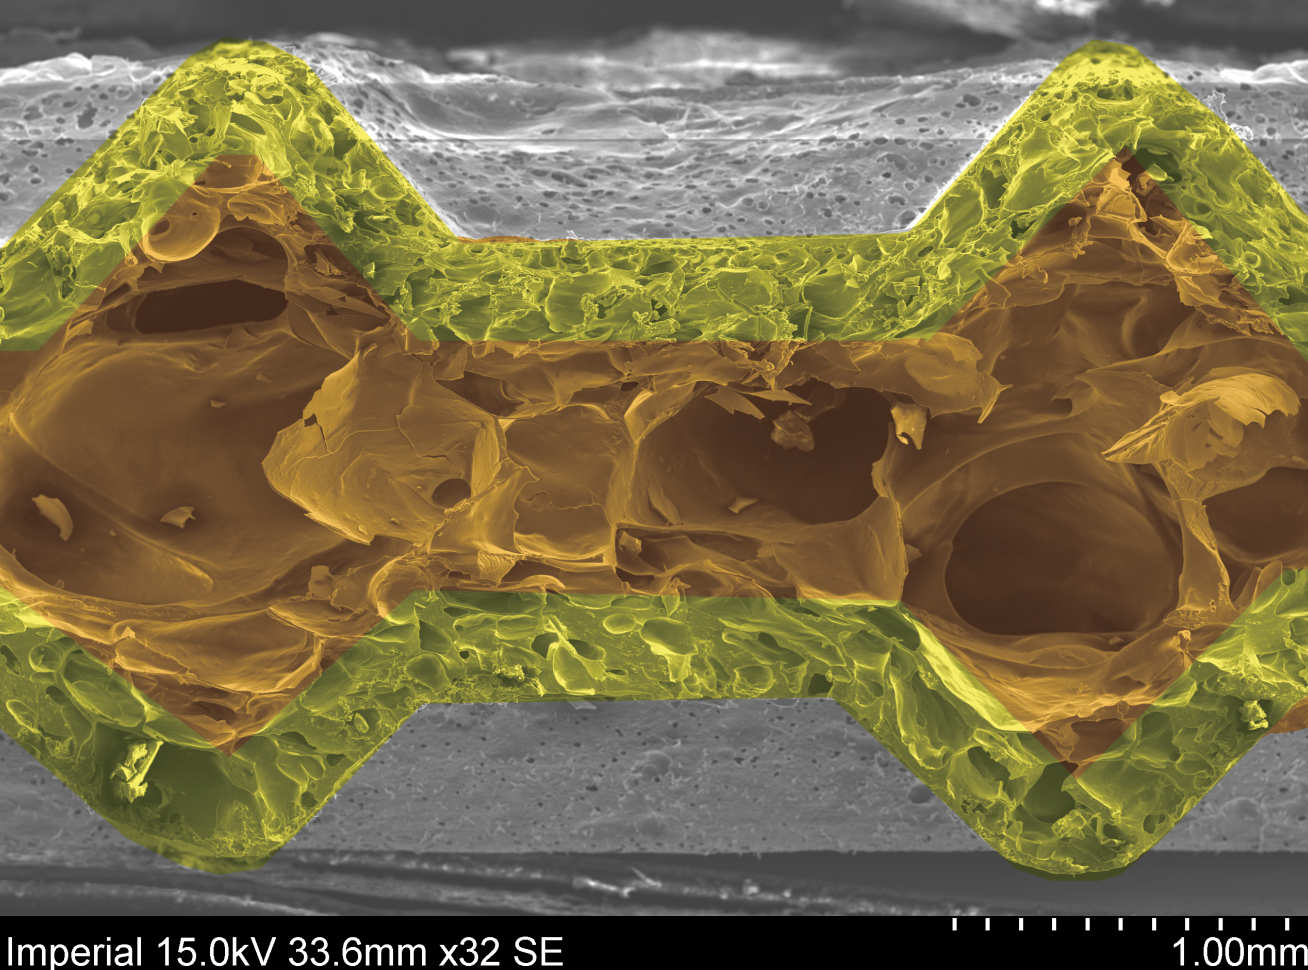 Scanning Electron Micrograph of the cross-section of a confectionery wafer showing its sandwich structure